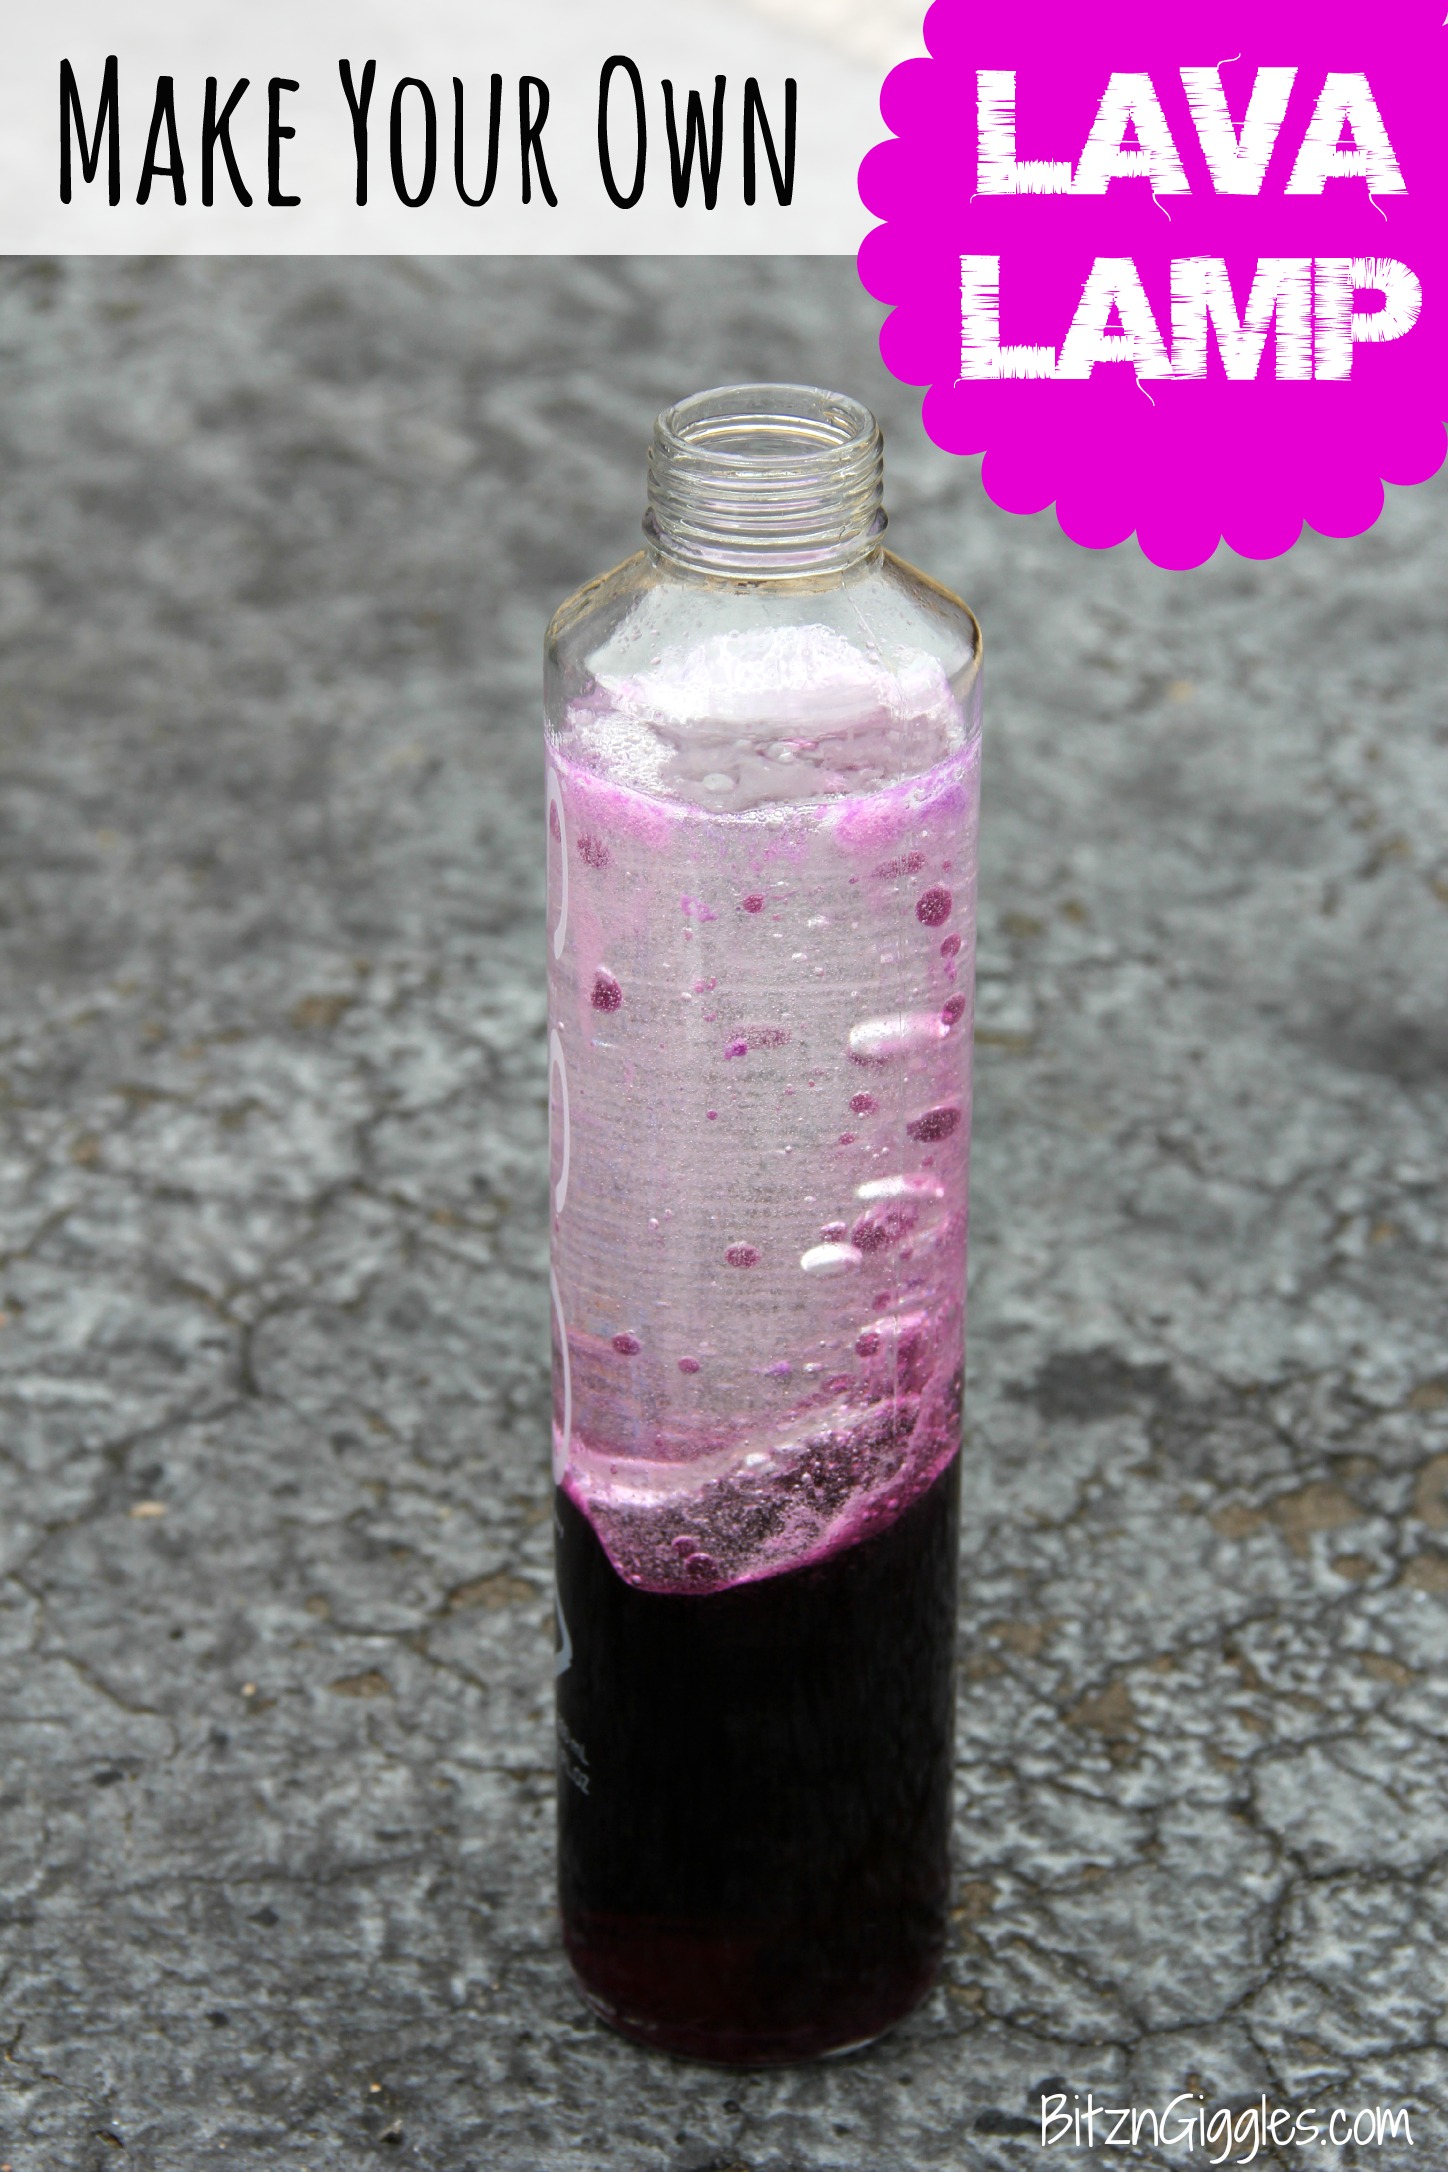 Make Your Own Lava Lamp - Bitz & Giggles